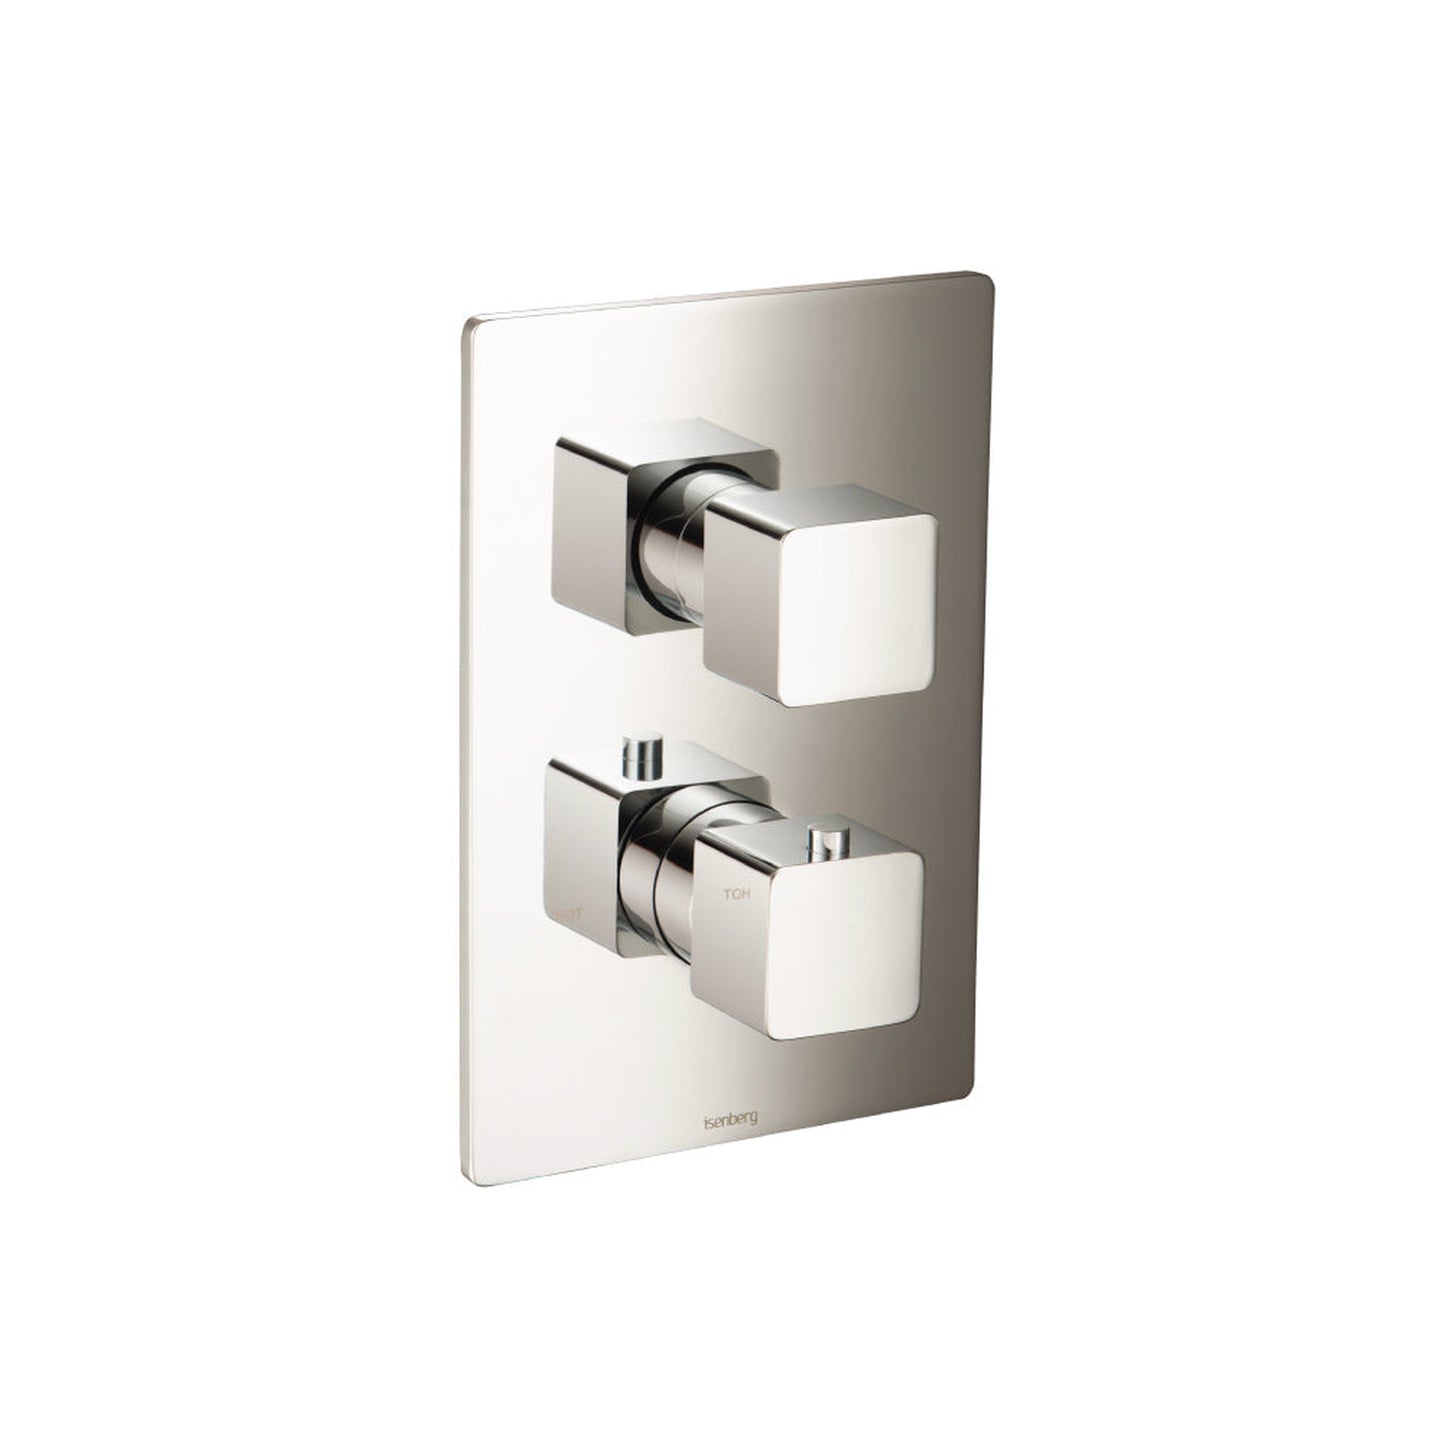 Isenberg Serie 196 3/4" Single Output Thermostatic Shower Valve and Trim in Polished Nickel